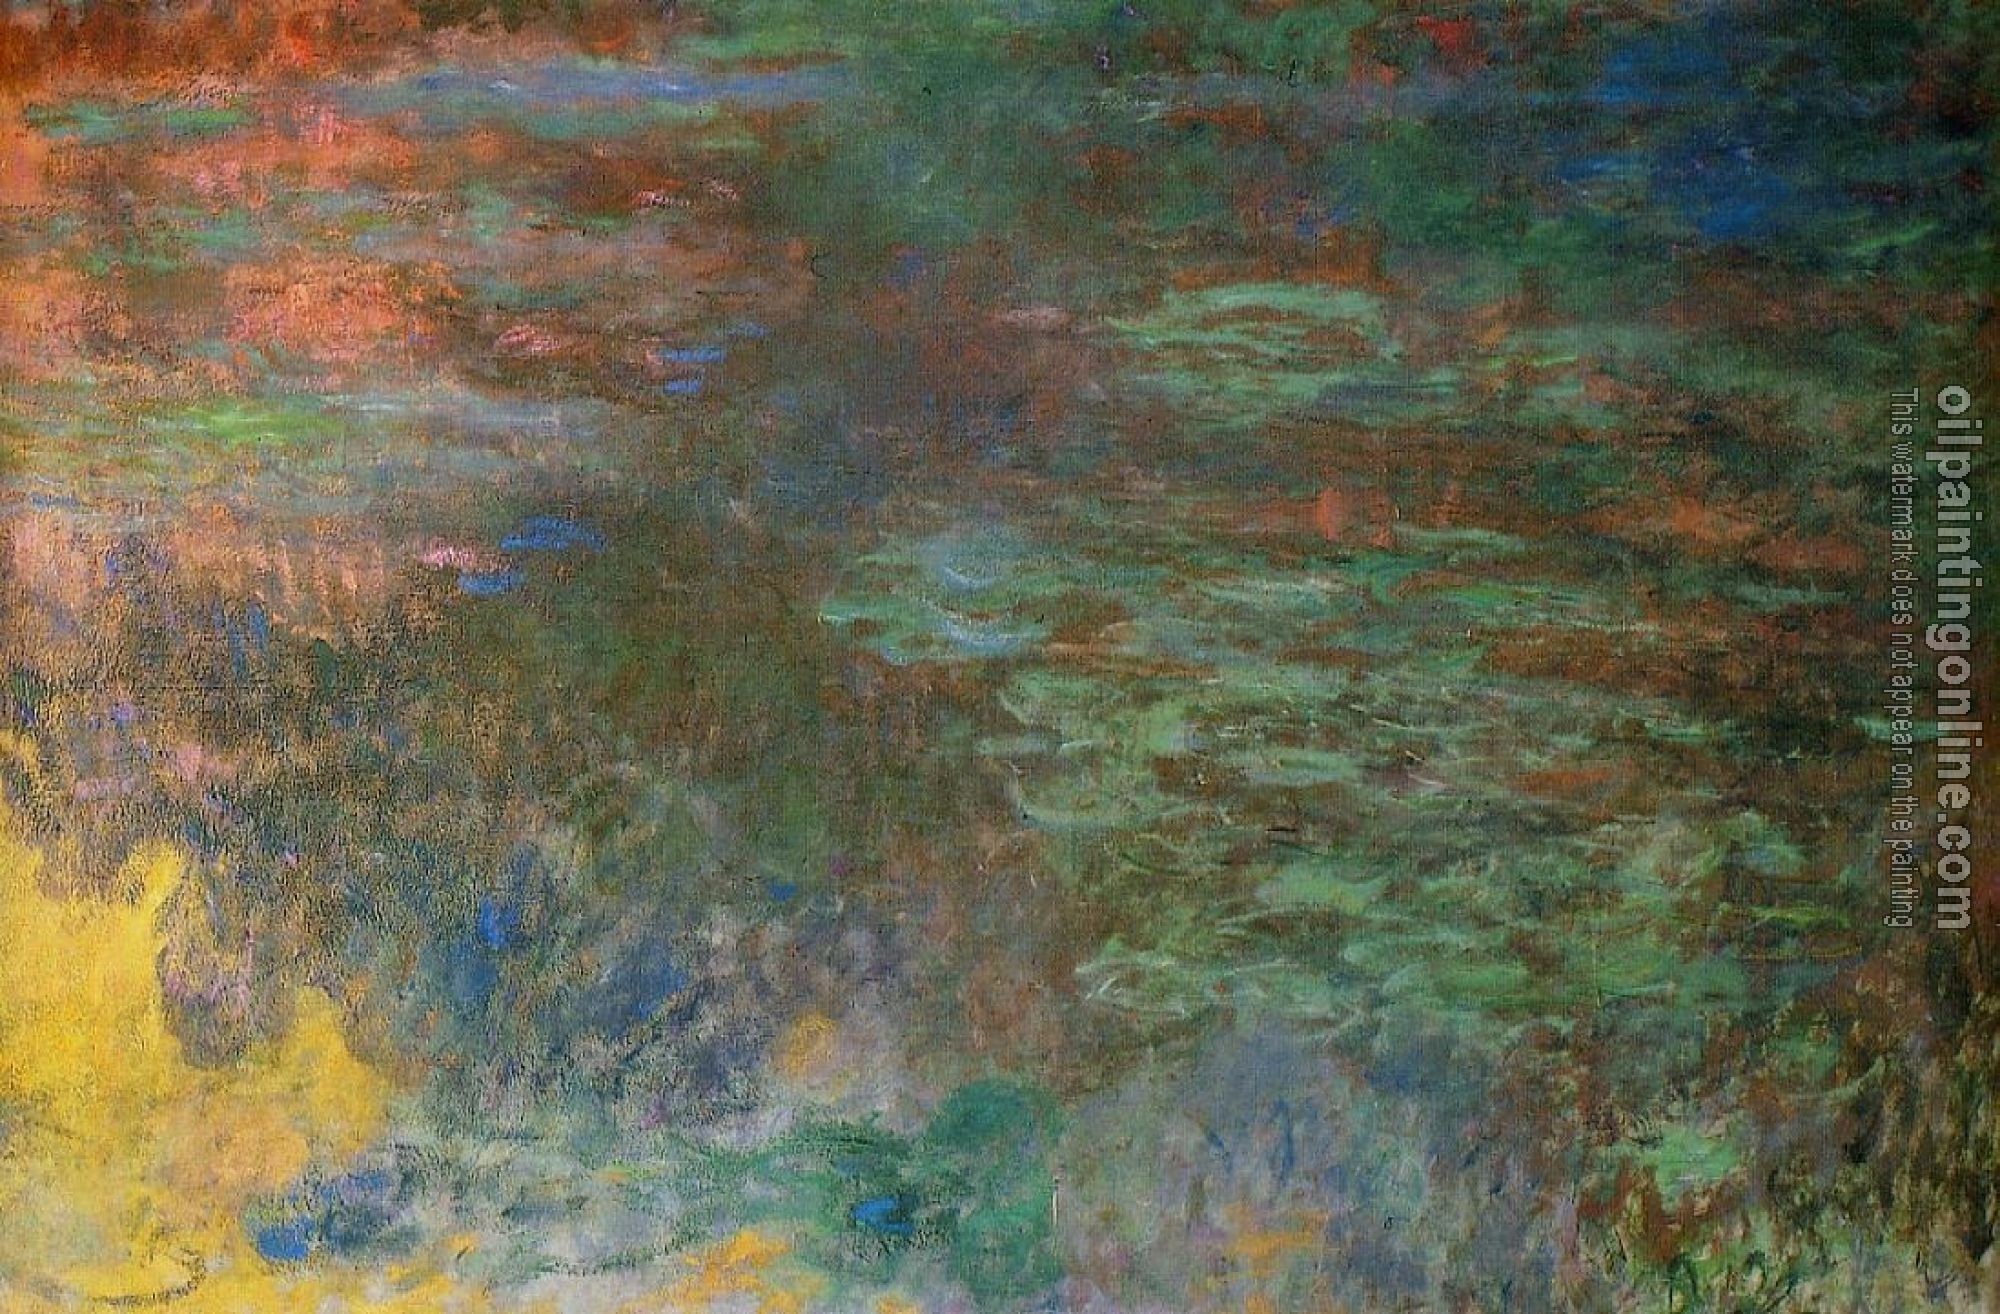 Monet, Claude Oscar - Water-Lily Pond, Evening, right panel